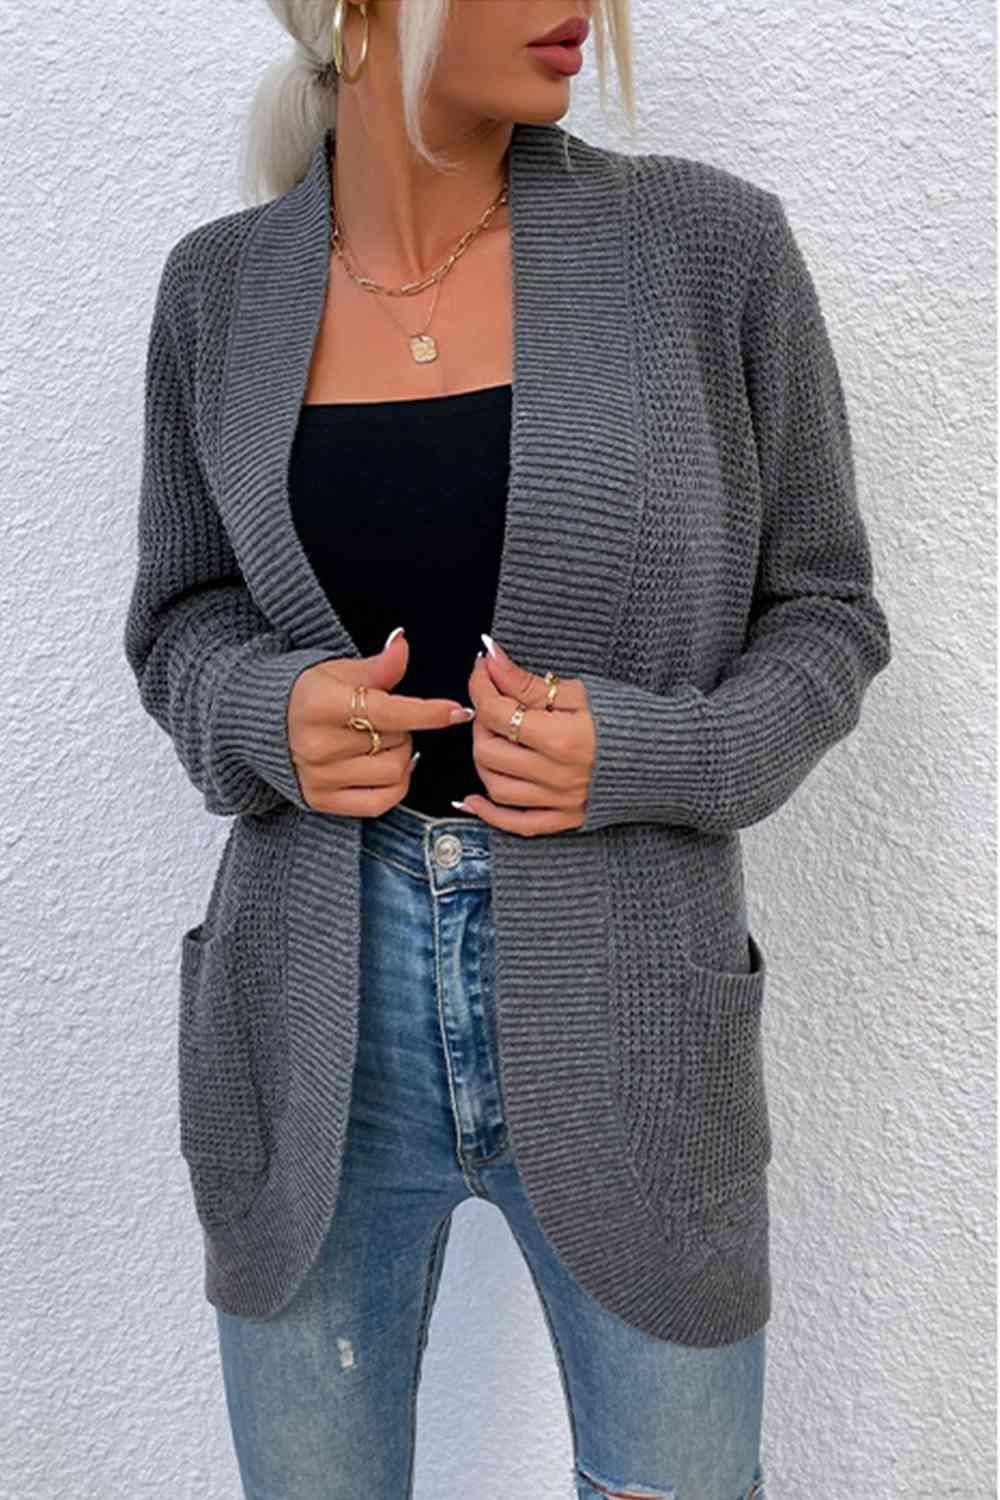 a woman wearing a gray cardigan sweater and ripped jeans